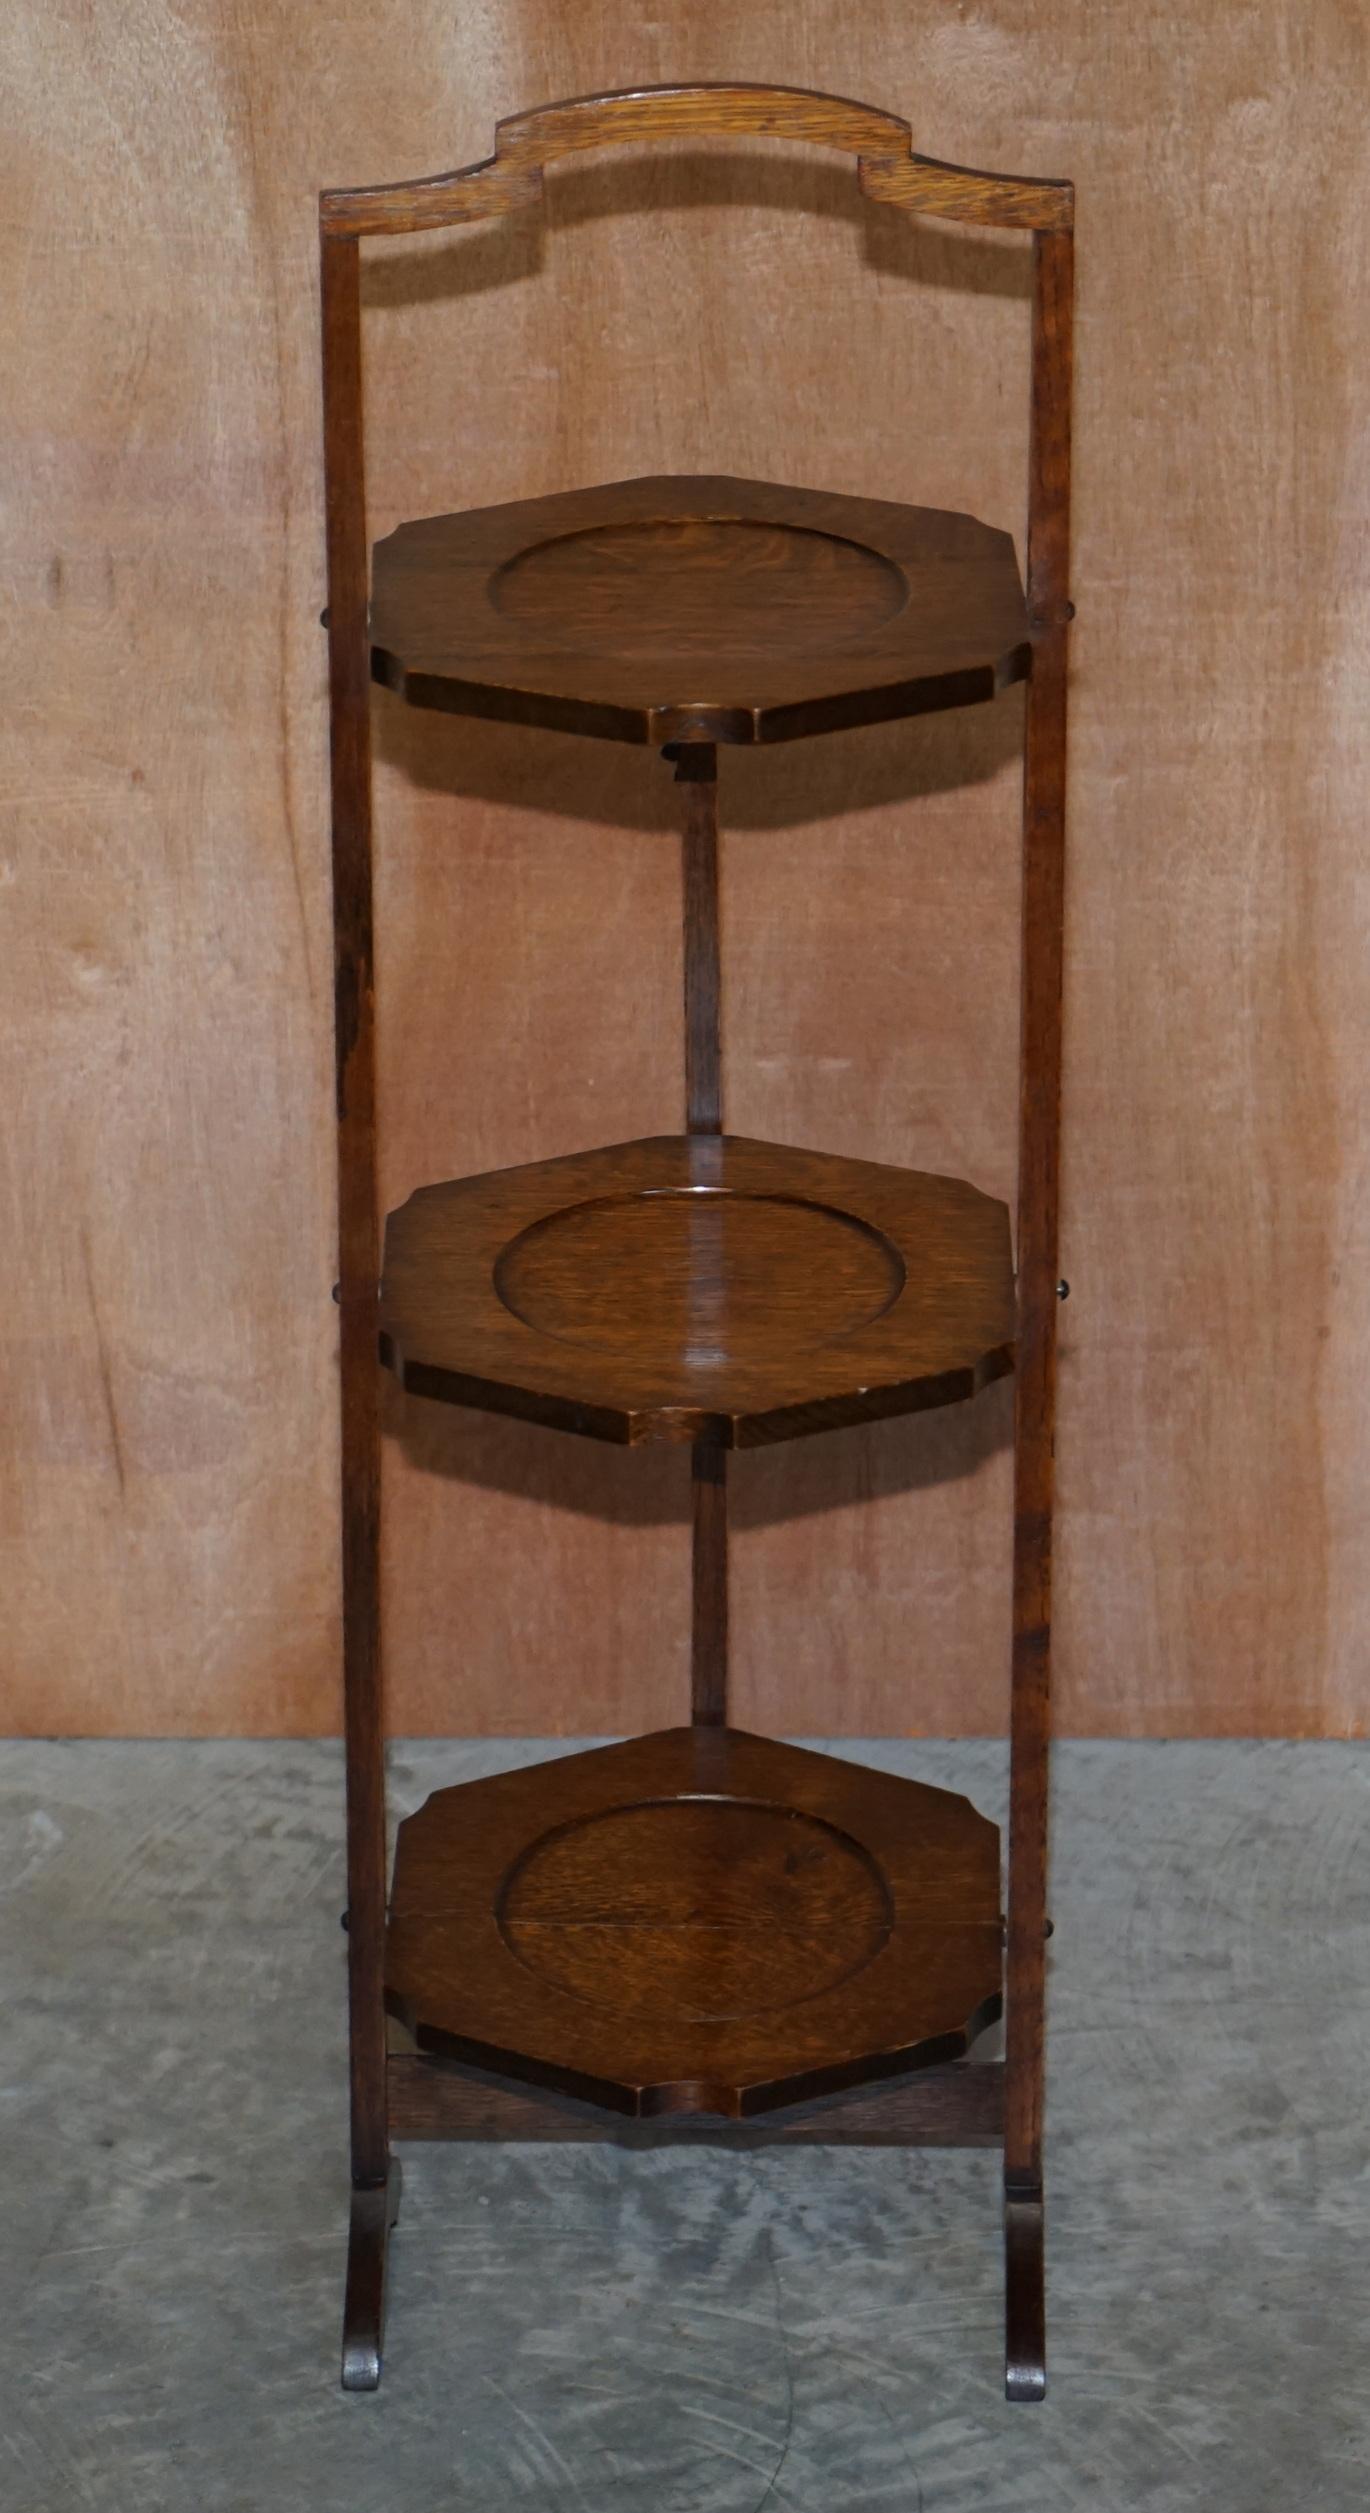 We are delighted to offer this lovely circa 1910 English oak whatnot display stand or folding cake table

A good looking, decorative and well made piece. It can be used for displaying trinkets, small plants or serving cakes. Its made of oak and